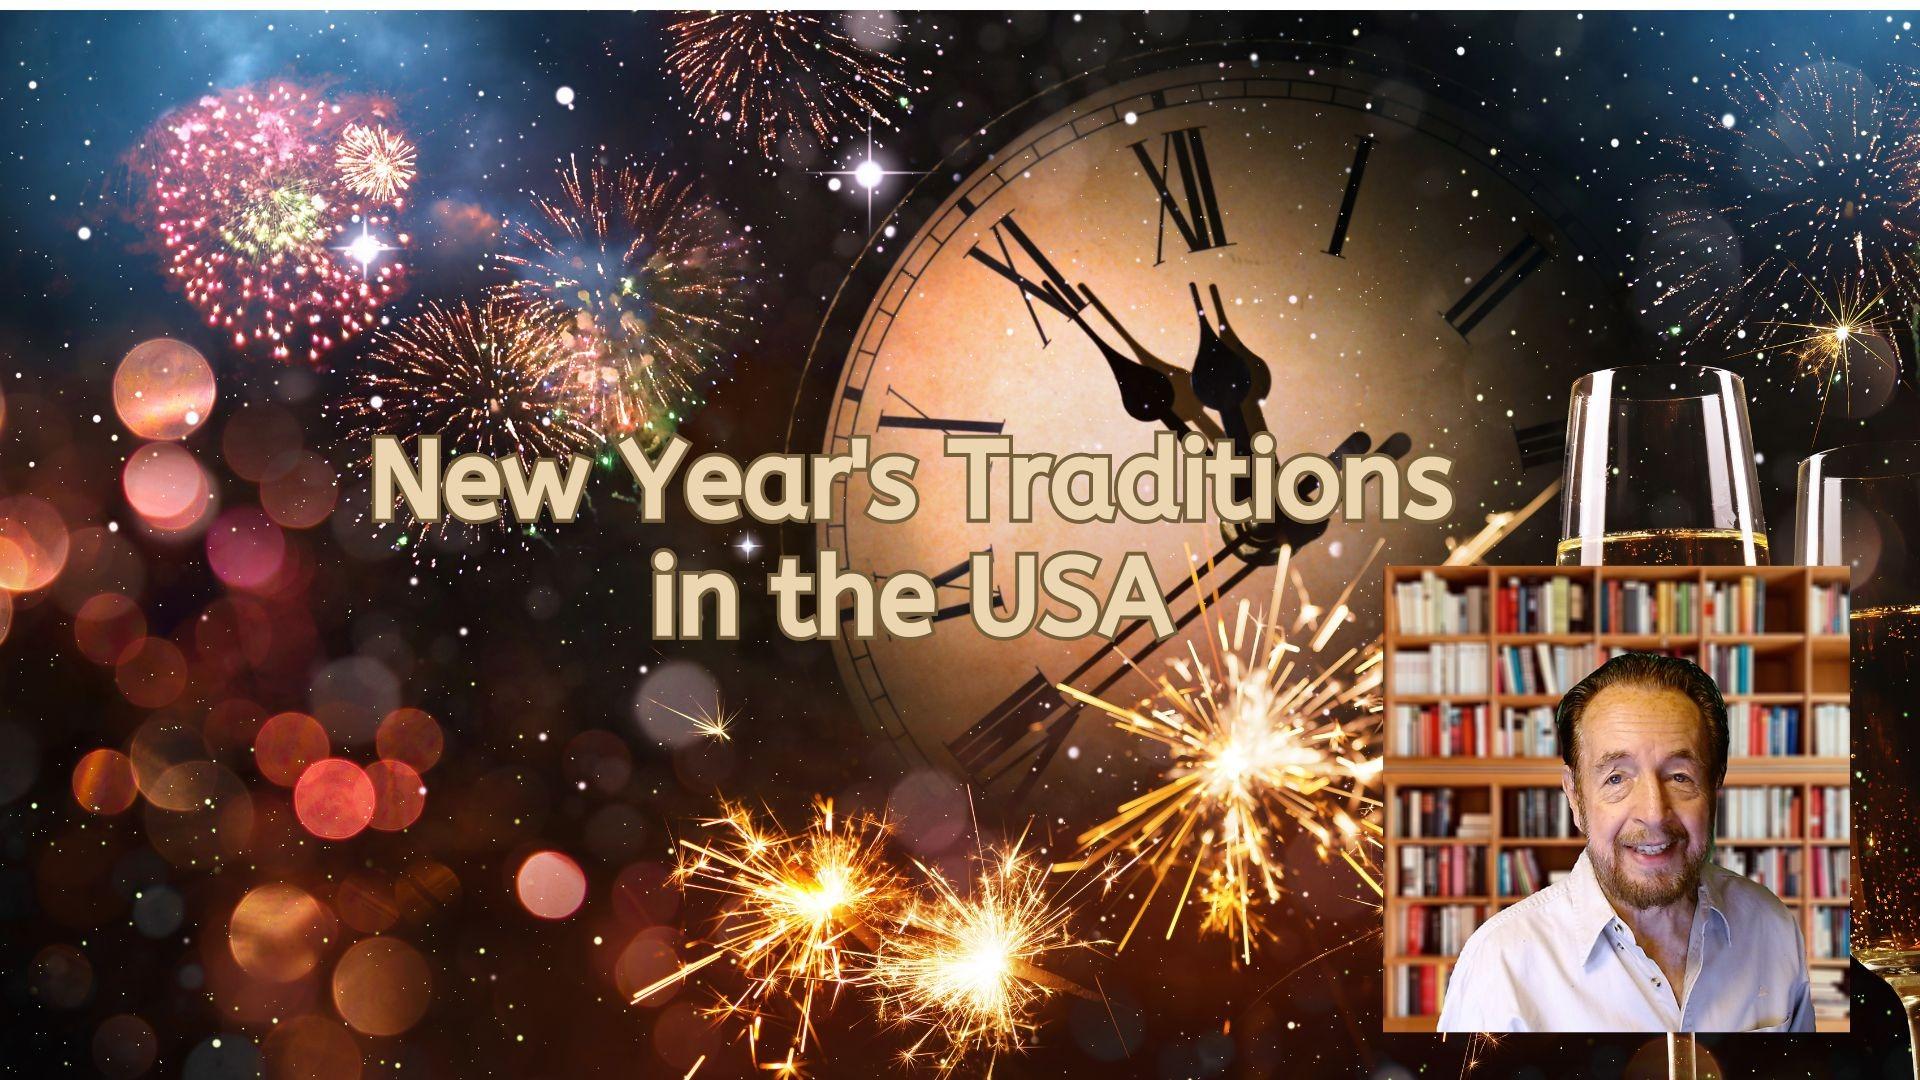 New Year's Traditions in the USA